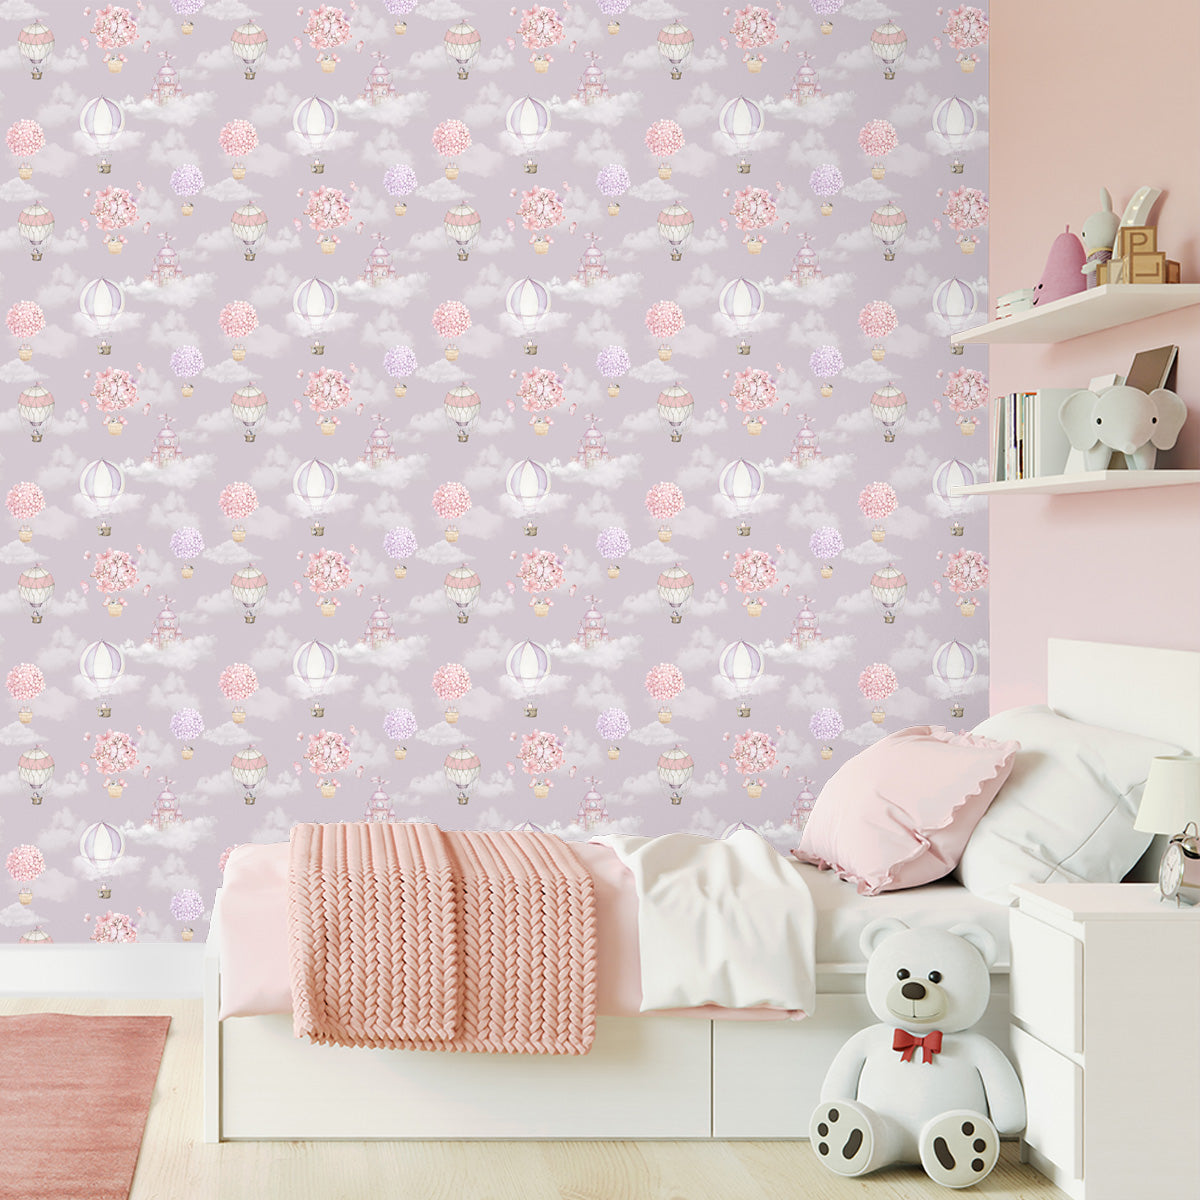 Balloons of Blooms, Adorable Hot Air Balloon Wallpaper for Girls Room, Lilac